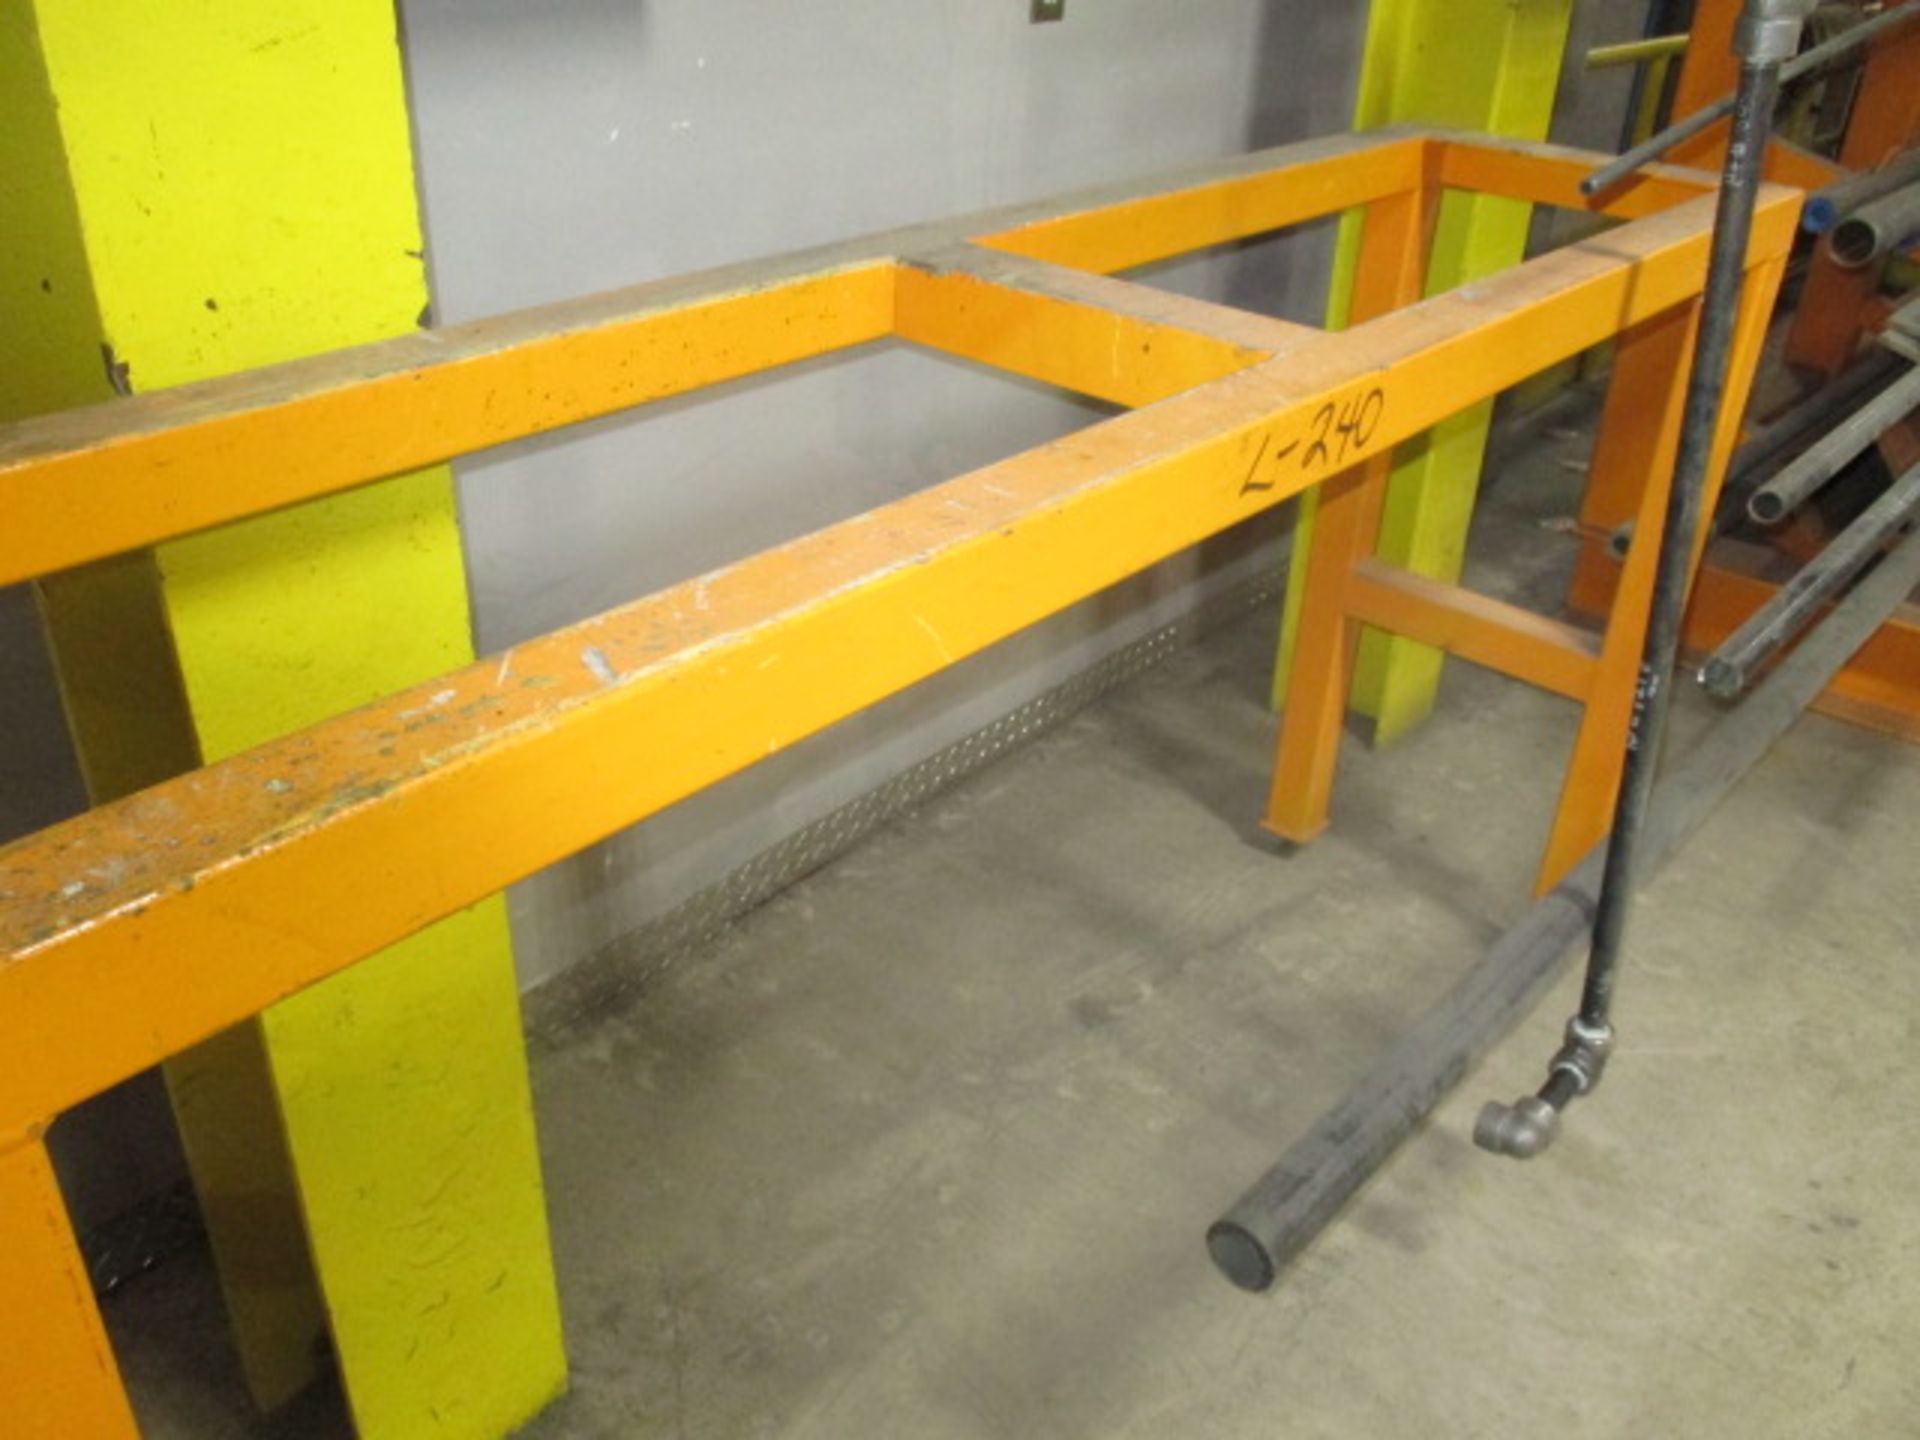 Metal Pipe Stand / Pipe 16' Various Diam Pipes and tubing etc Metal Equipment Stand 70" X 18" - Image 3 of 3